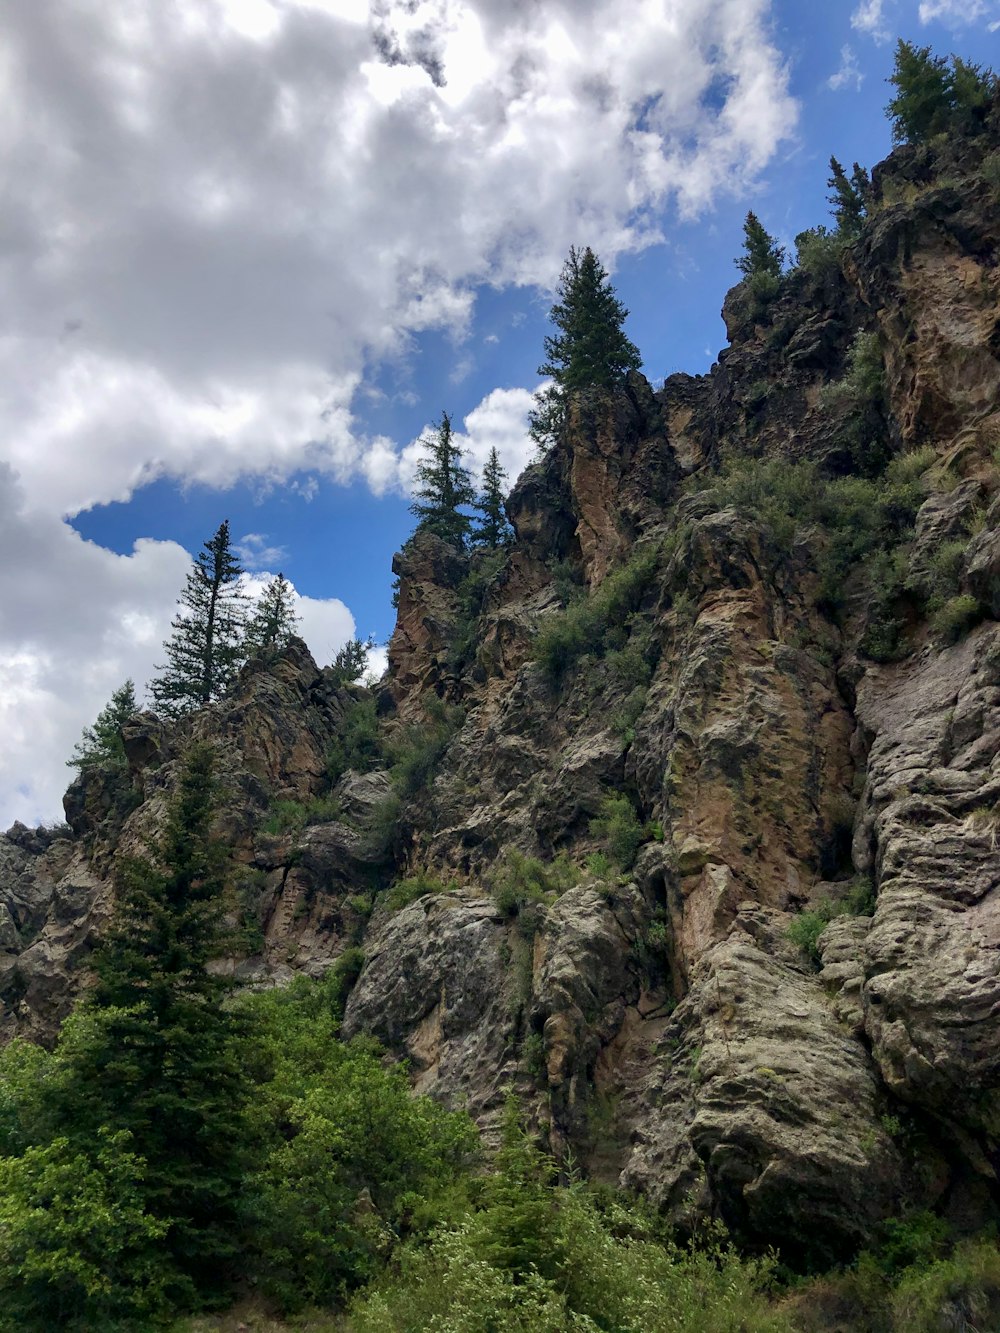 green trees on brown rocky mountain under blue and white cloudy sky during daytime